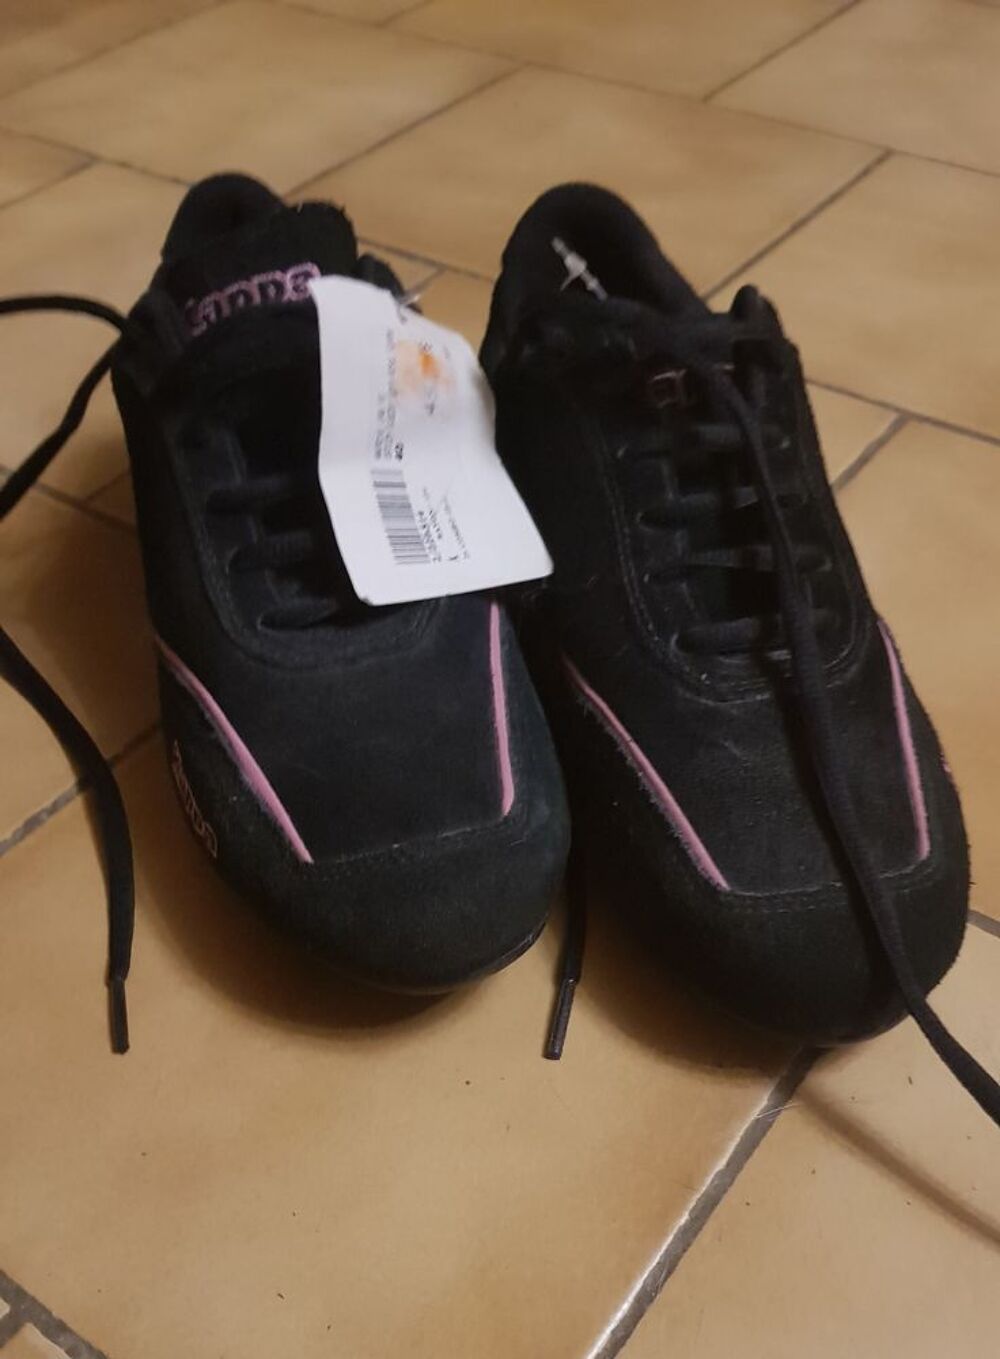 Chaussures neuves KAPPA NOIR/ROSE pointure 40 Chaussures